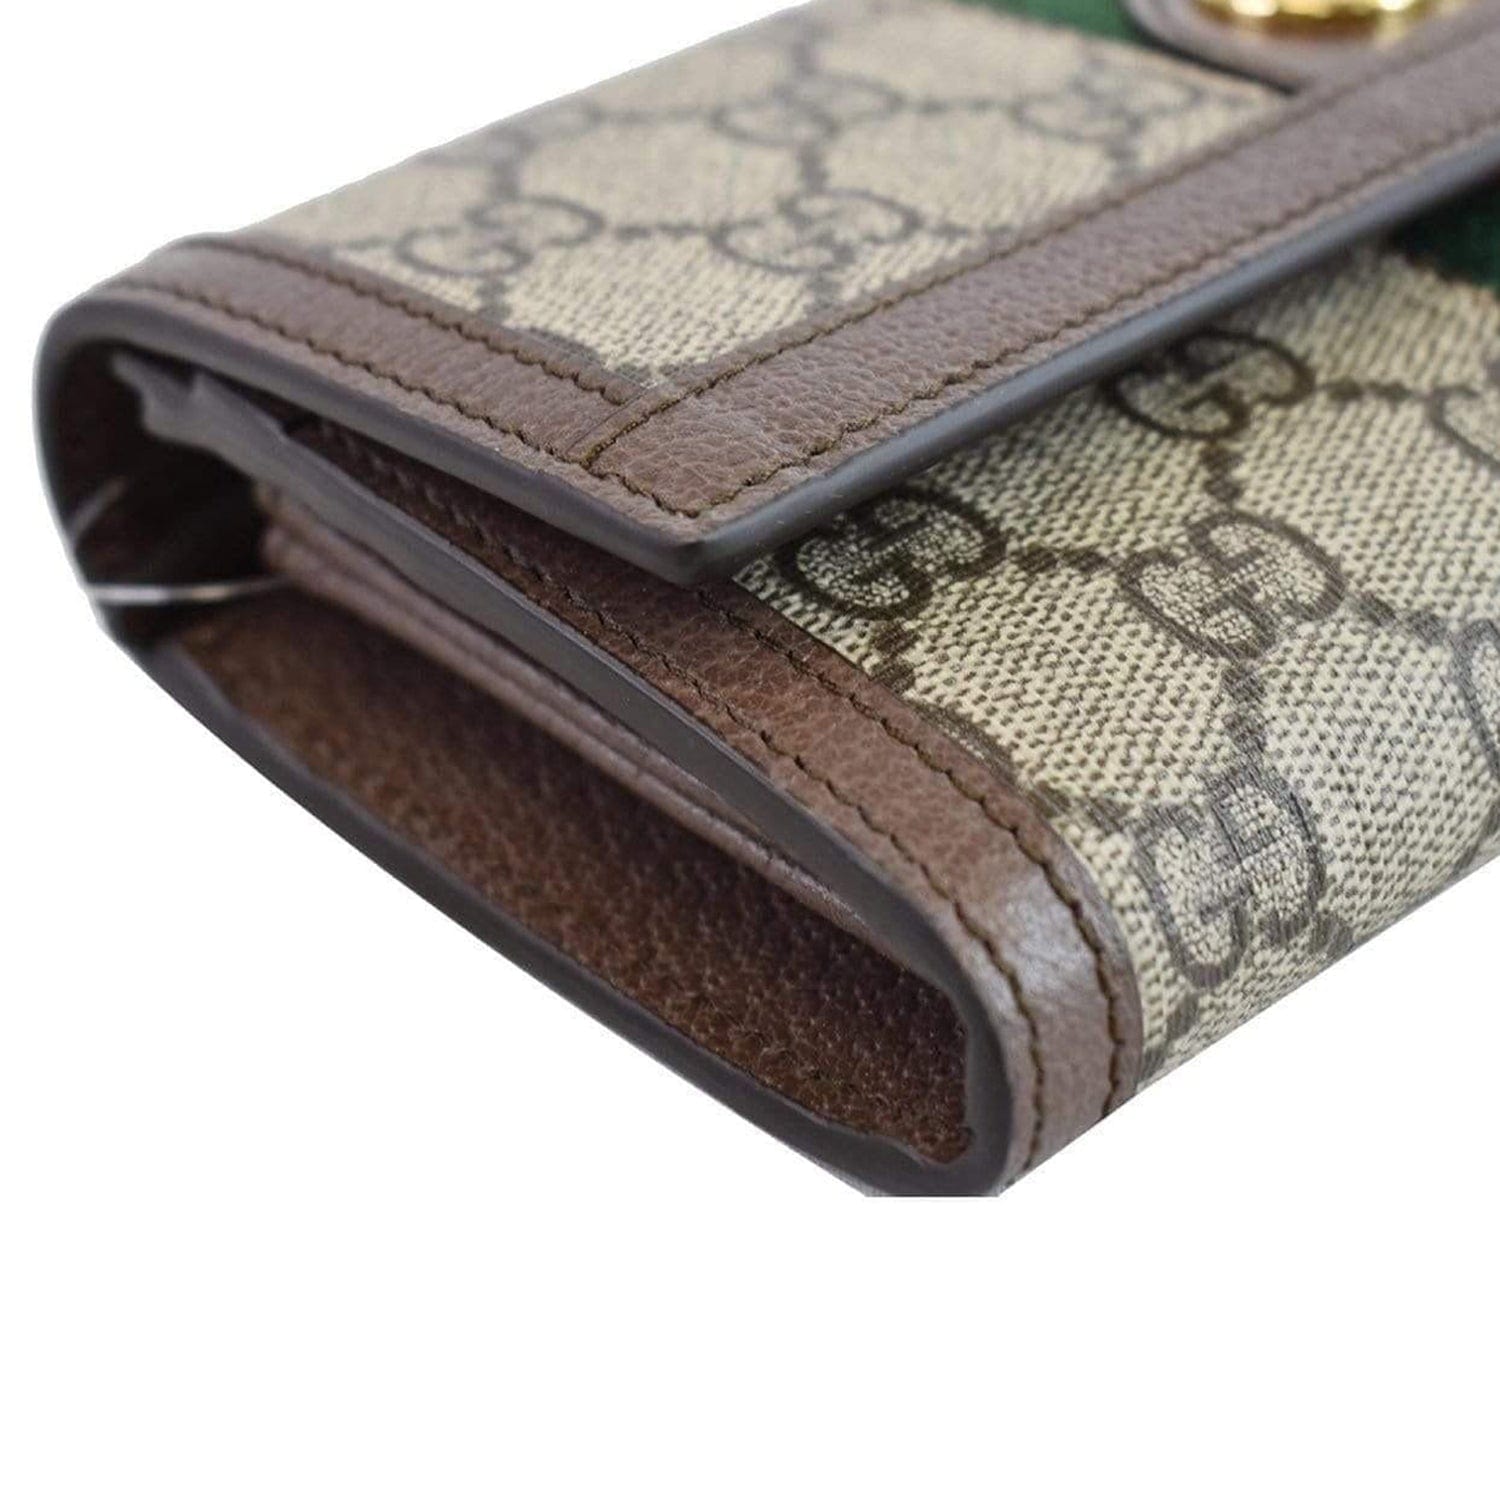 GUCCI Ophidia GG Continental Supreme Canvas Wallet Beige 523153 - 15%